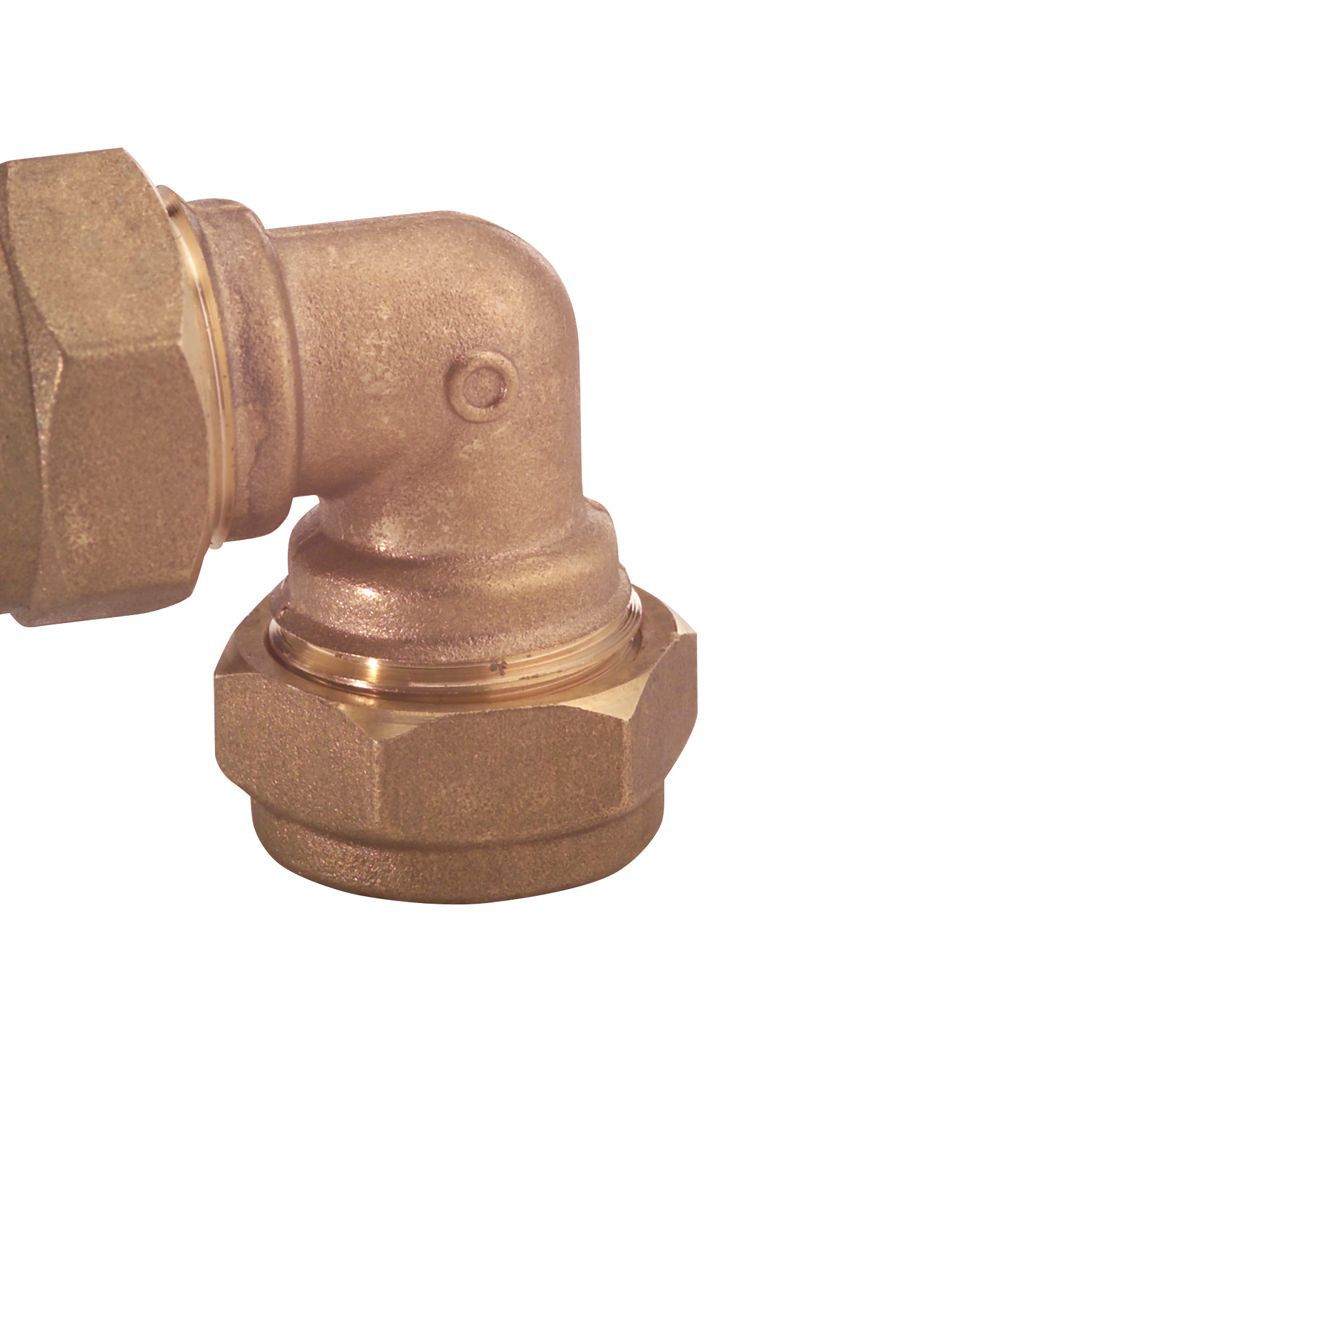 Brass compression reducing elbow 90 degre